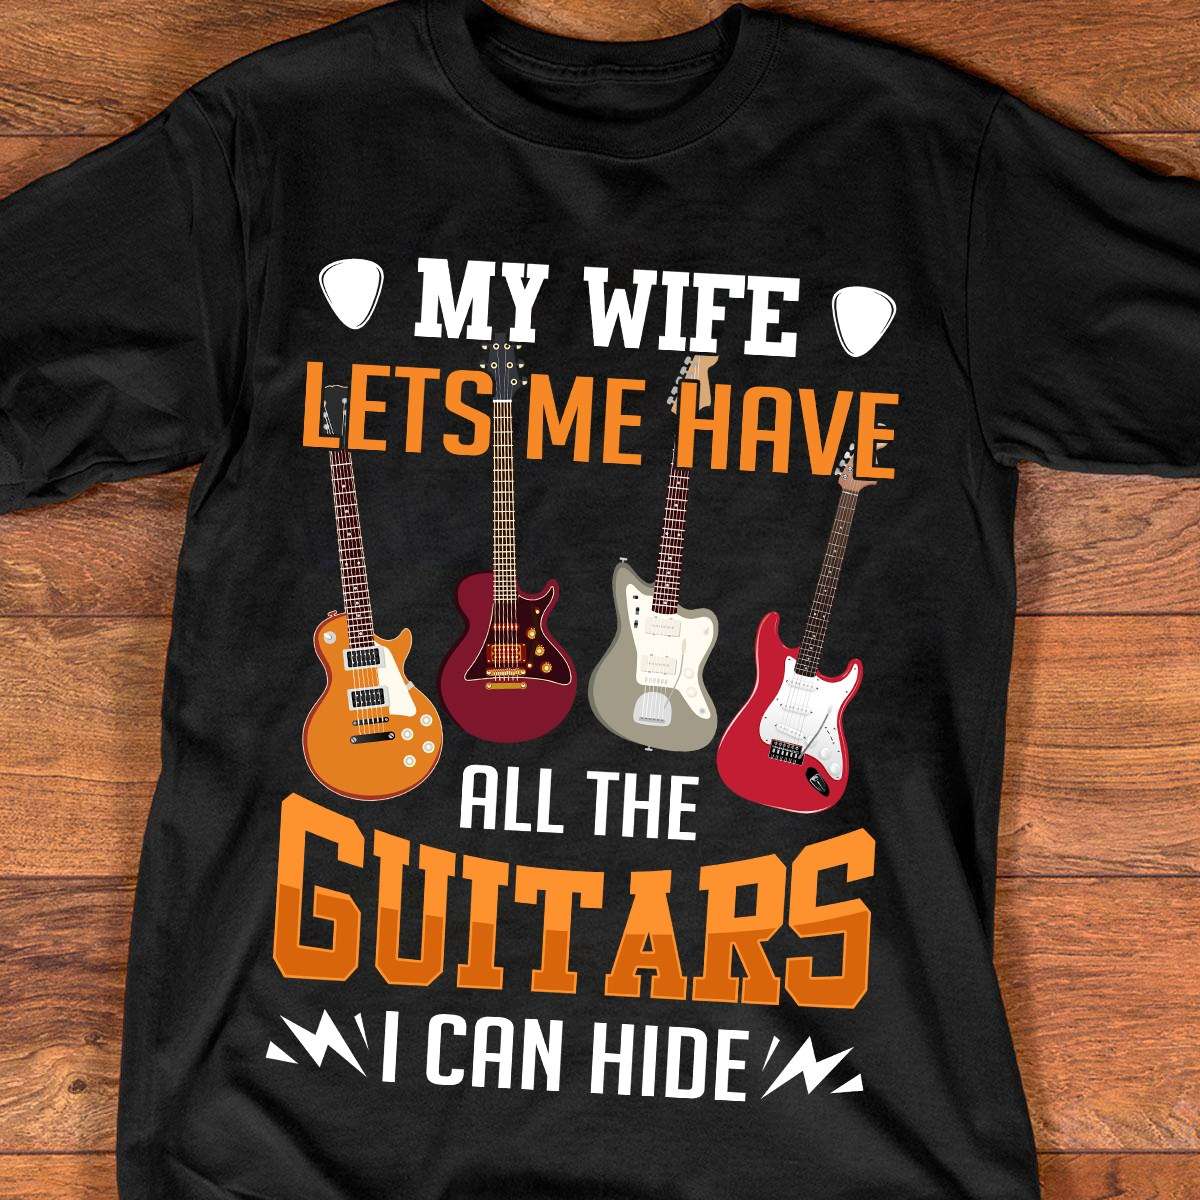 My wife lets me have all the guitars - Gift for guitarist, husband and wife